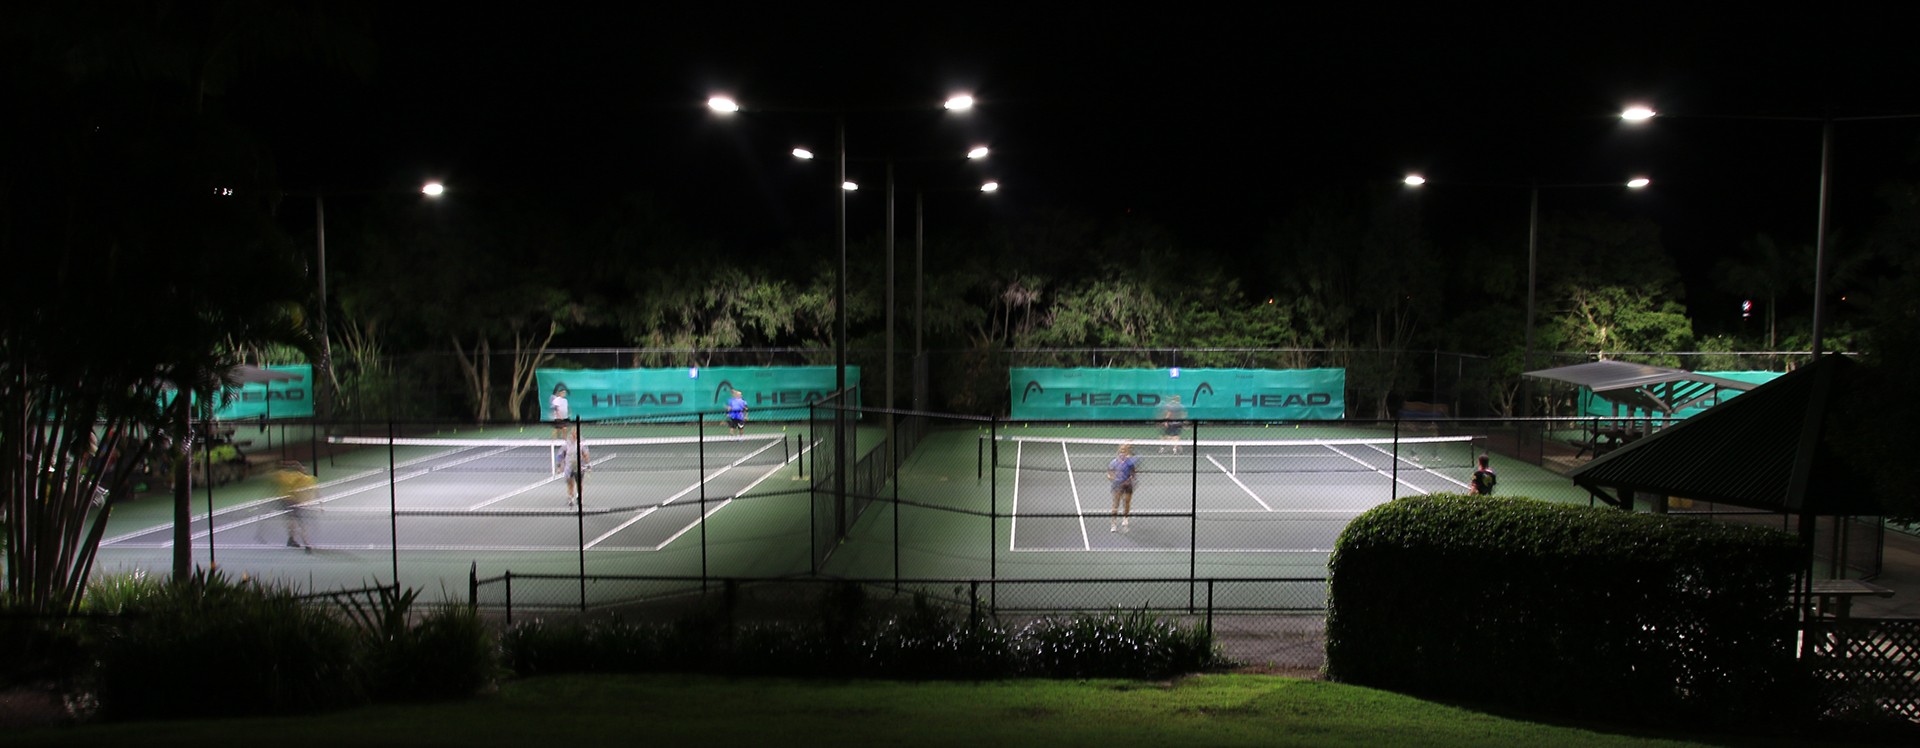 Tennis Lights and Poles - Light up your tennis court with LED lighting